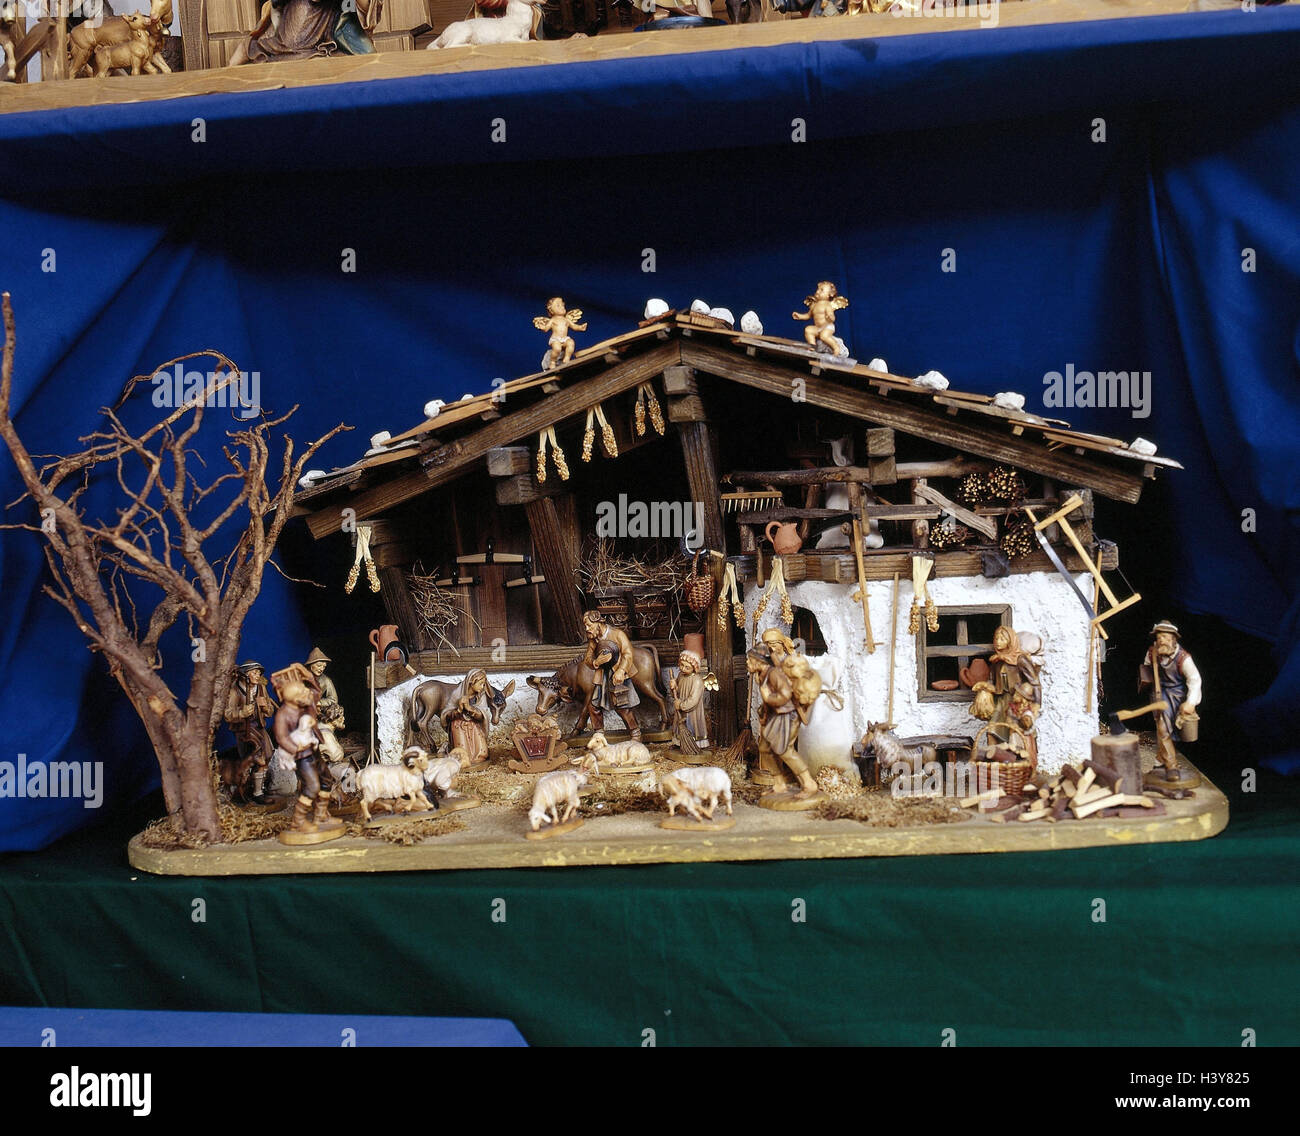 Creche Tirol home manger, Christmas, manger, traditions, religion, holy family, Jesus's child, nativity figurines, figures, wooden, wooden figures, product photography, Still life Stock Photo